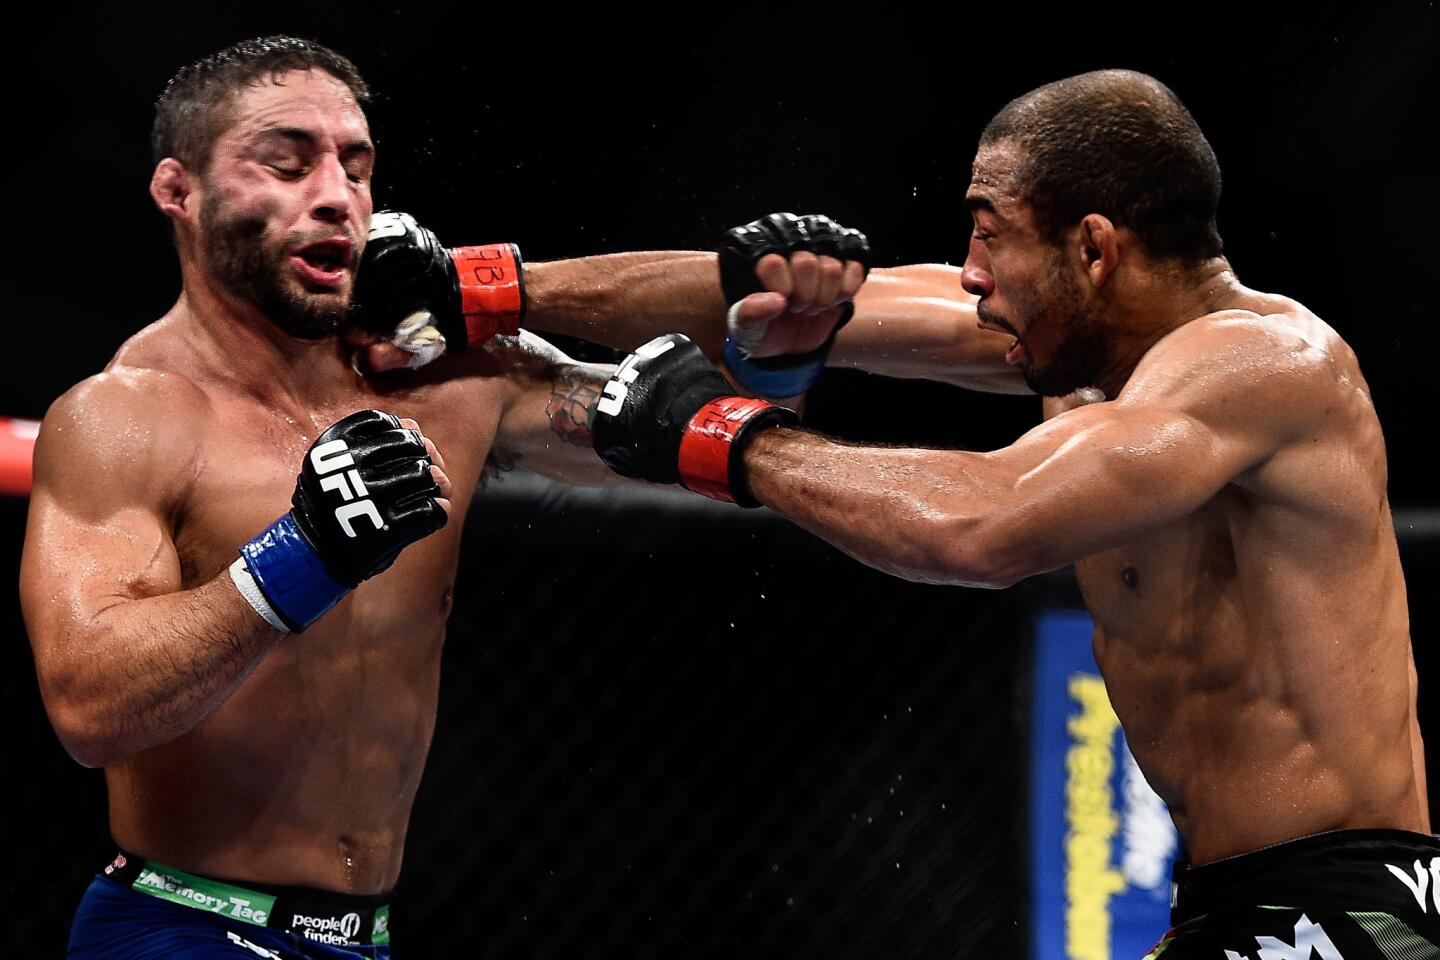 Jose Aldo, right, defeated Chad Mendes by unanimous decision in their featherweight championship bout on Oct. 25, 2014, at UFC 179 in Rio de Janeiro, Brazil.